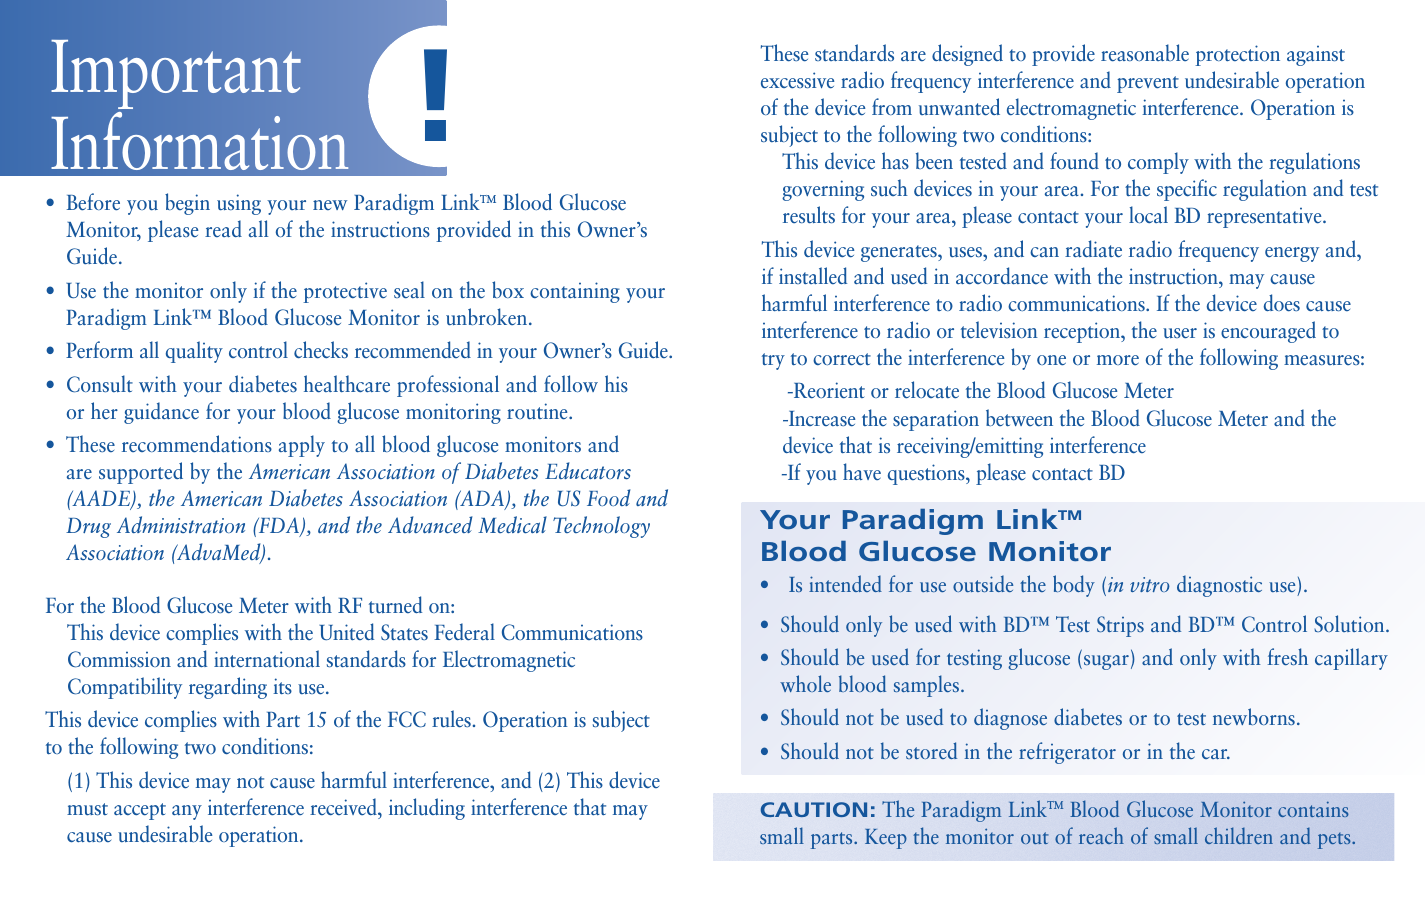 •Before you begin using your new Paradigm LinkTMBlood GlucoseMonitor, please read all of the instructions provided in this Owner’sGuide.•Use the monitor only if the protective seal on the box containing yourParadigm Link™ Blood Glucose Monitor is unbroken. •Perform all quality control checks recommended in your Owner’s Guide.•Consult with your diabetes healthcare professional and follow his or her guidance for your blood glucose monitoring routine. •These recommendations apply to all blood glucose monitors and are supported by the American Association of Diabetes Educators(AADE), the American Diabetes Association (ADA), the US Food andDrug Administration (FDA), and the Advanced Medical TechnologyAssociation (AdvaMed).For the Blood Glucose Meter with RF turned on:This device complies with the United States Federal Communications Commission and international standards for Electromagnetic Compatibility regarding its use.This device complies with Part 15 of the FCC rules. Operation is subject to the following two conditions:(1) This device may not cause harmful interference, and (2) This device must accept any interference received, including interference that may cause undesirable operation.Your Paradigm LinkTMBlood Glucose Monitor•Is intended for use outside the body (in vitro diagnostic use). •Should only be used with BD™ Test Strips and BD™ Control Solution.•Should be used for testing glucose (sugar) and only with fresh capillarywhole blood samples.•Should not be used to diagnose diabetes or to test newborns.•Should not be stored in the refrigerator or in the car.CAUTION:The Paradigm LinkTMBlood Glucose Monitor containssmall parts. Keep the monitor out of reach of small children and pets.Important Information !These standards are designed to provide reasonable protection againstexcessive radio frequency interference and prevent undesirable operation of the device from unwanted electromagnetic interference. Operation issubject to the following two conditions:This device has been tested and found to comply with the regulations governing such devices in your area. For the specific regulation and test results for your area, please contact your local BD representative.This device generates, uses, and can radiate radio frequency energy and, if installed and used in accordance with the instruction, may cause harmful interference to radio communications. If the device does cause interference to radio or television reception, the user is encouraged to try to correct the interference by one or more of the following measures:-Reorient or relocate the Blood Glucose Meter-Increase the separation between the Blood Glucose Meter and the device that is receiving/emitting interference-If you have questions, please contact BD